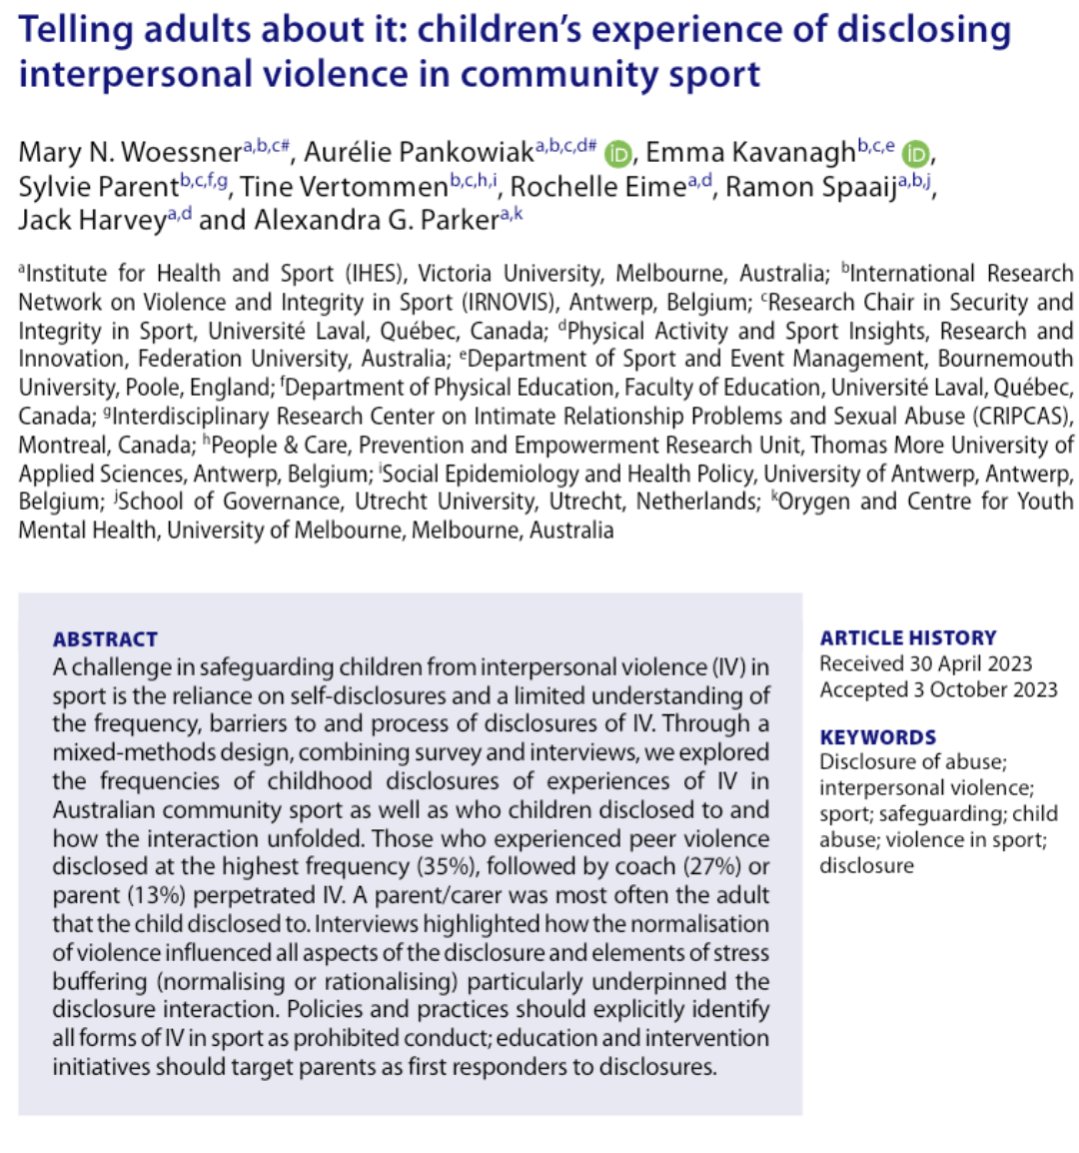 In our new study (survey + interviews), we found that less than half of the children who experienced abuse in community sport ever spoke with an adult about it. #safesport #abuseinsport tandfonline.com/doi/full/10.10…